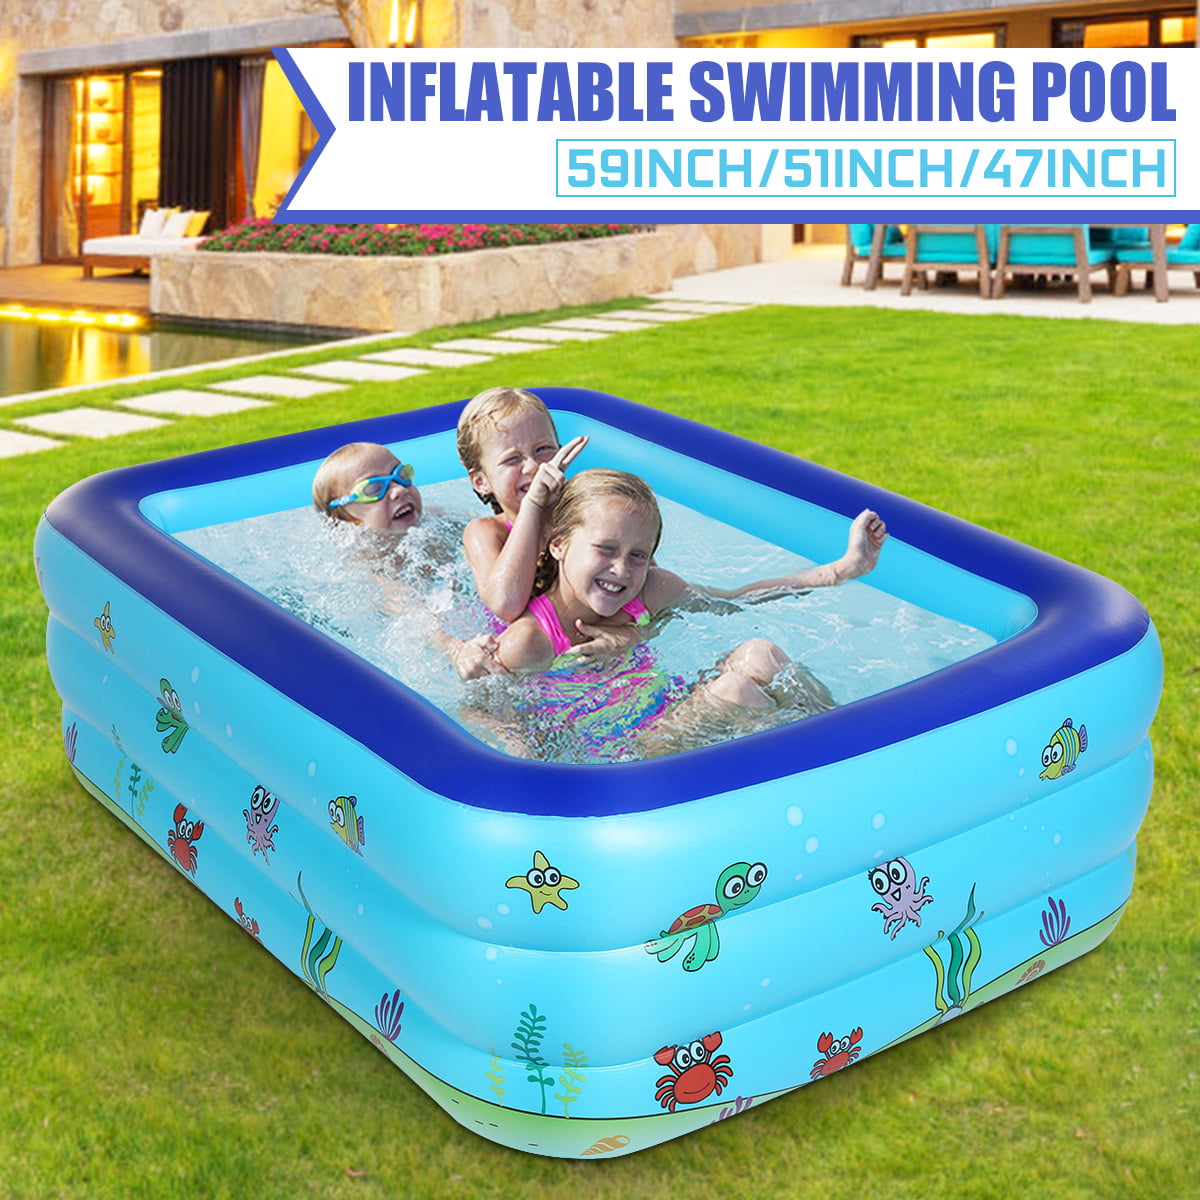 Children Inflatable Swimming Pool Large Family Summer Outdoor Play Pool 3 Kids 